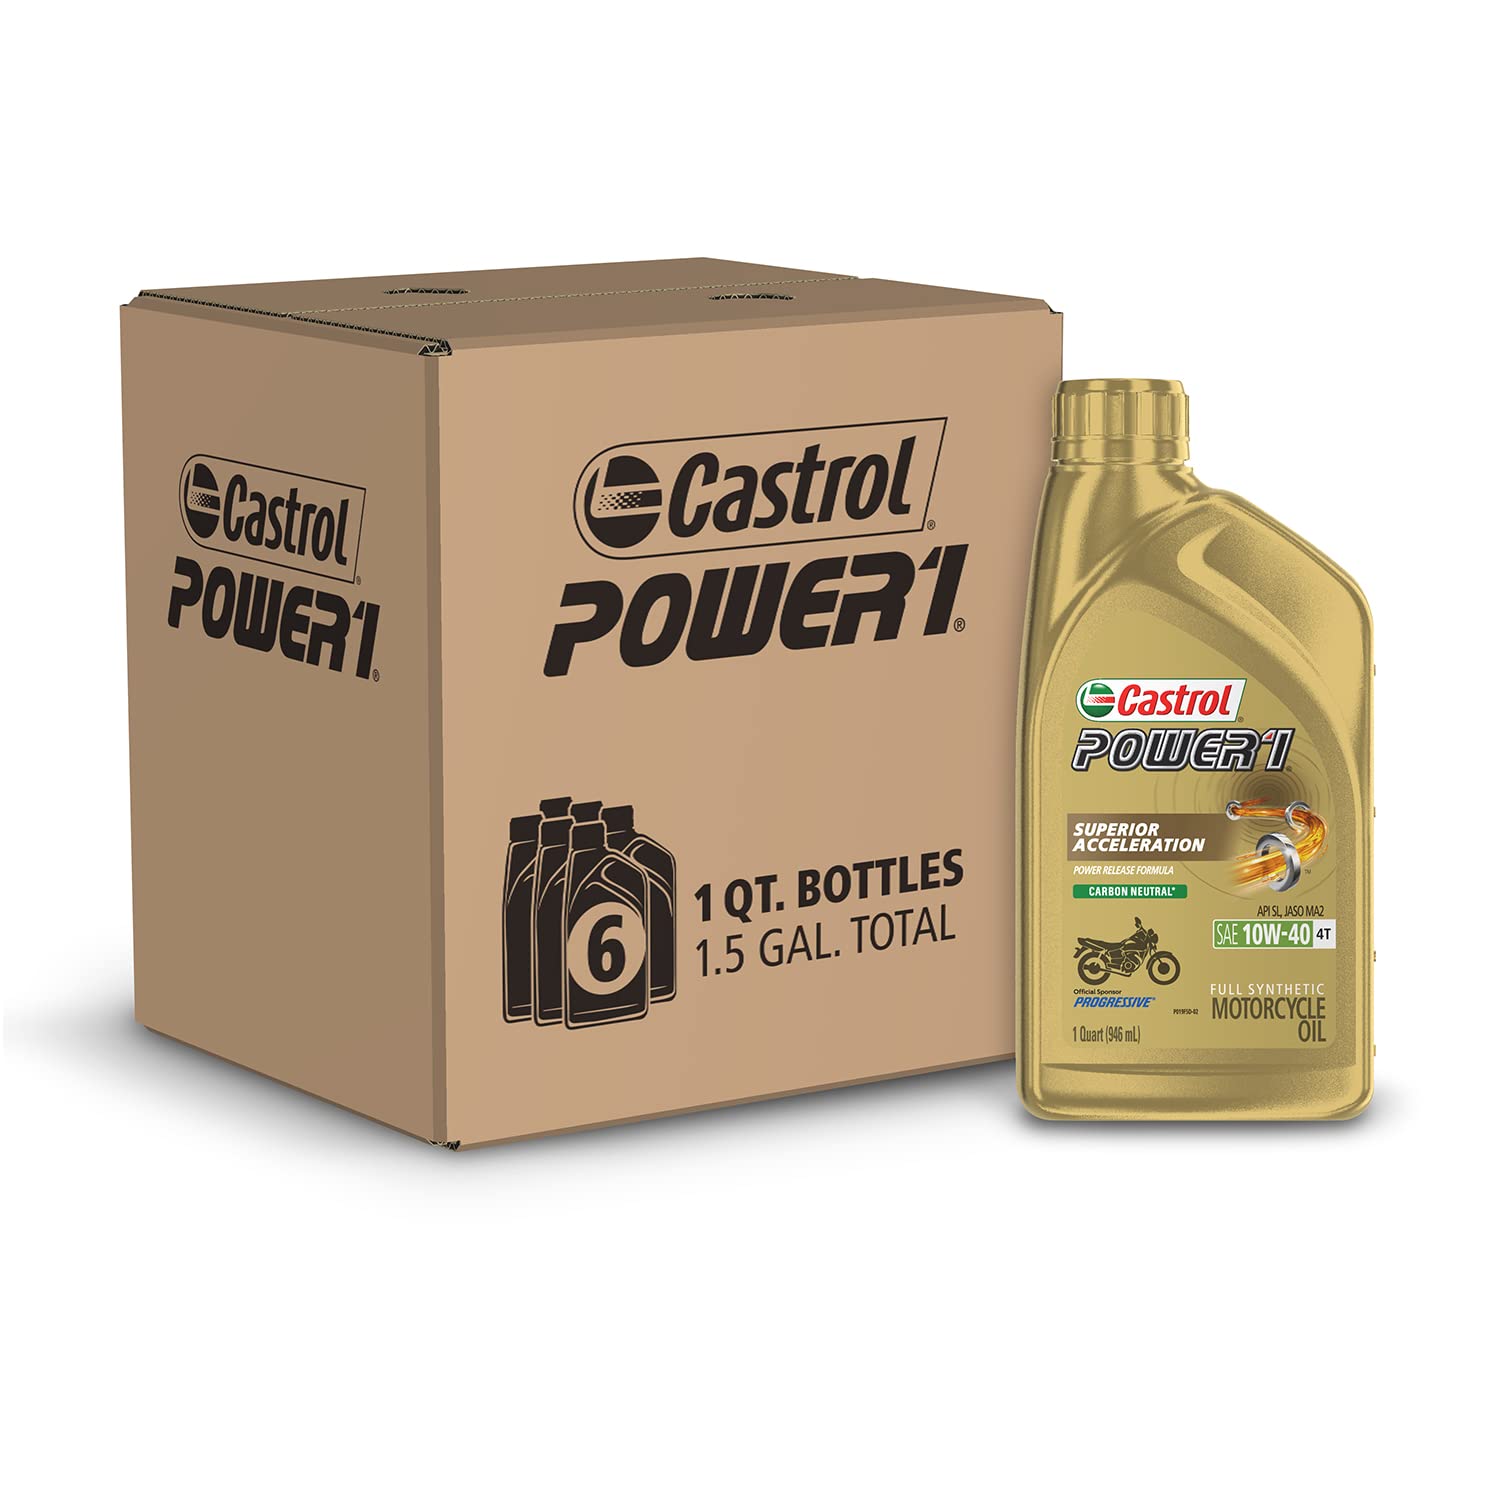 6-Pack Castrol Power1 4T 10W-40 Full Synthetic Motorcycle Oil, 1 Quart $38.49 + Free Shipping